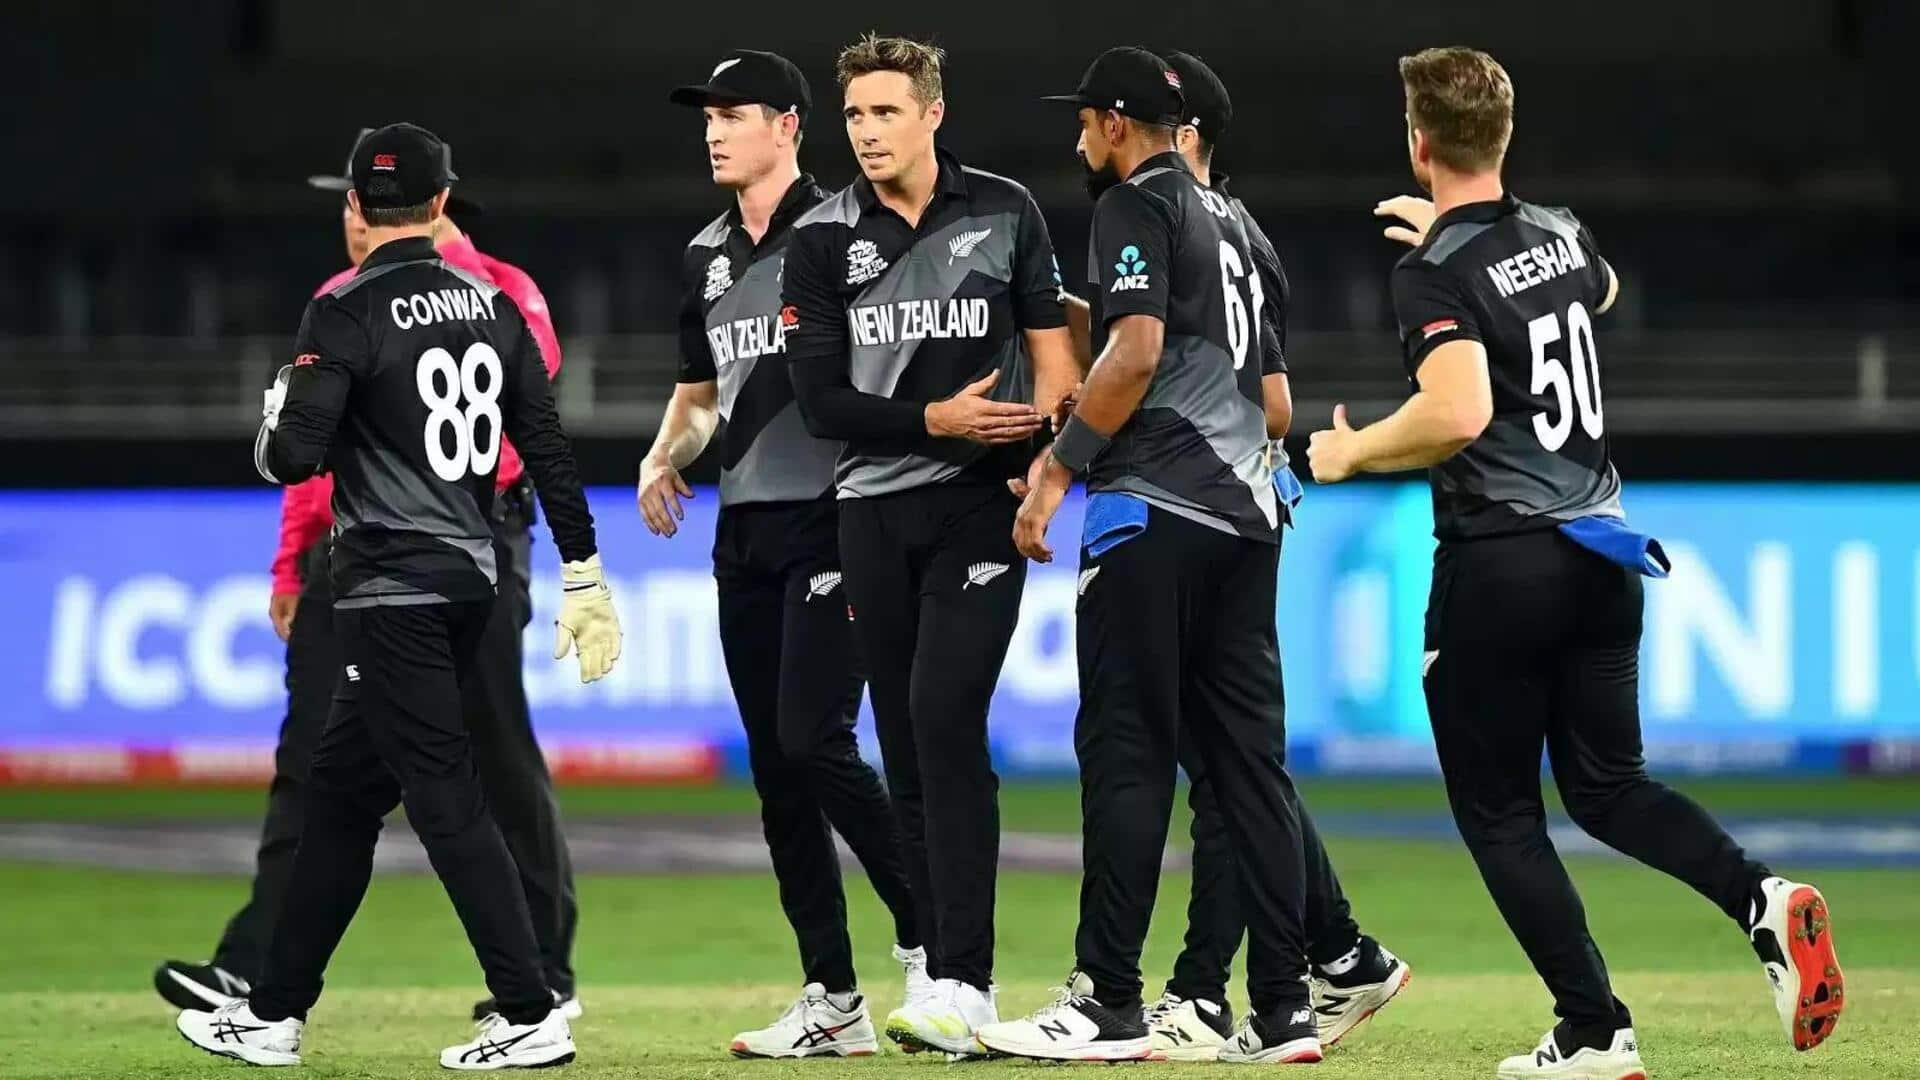 NZ announce 15-member squad for 2024 T20 WC, Conway picked